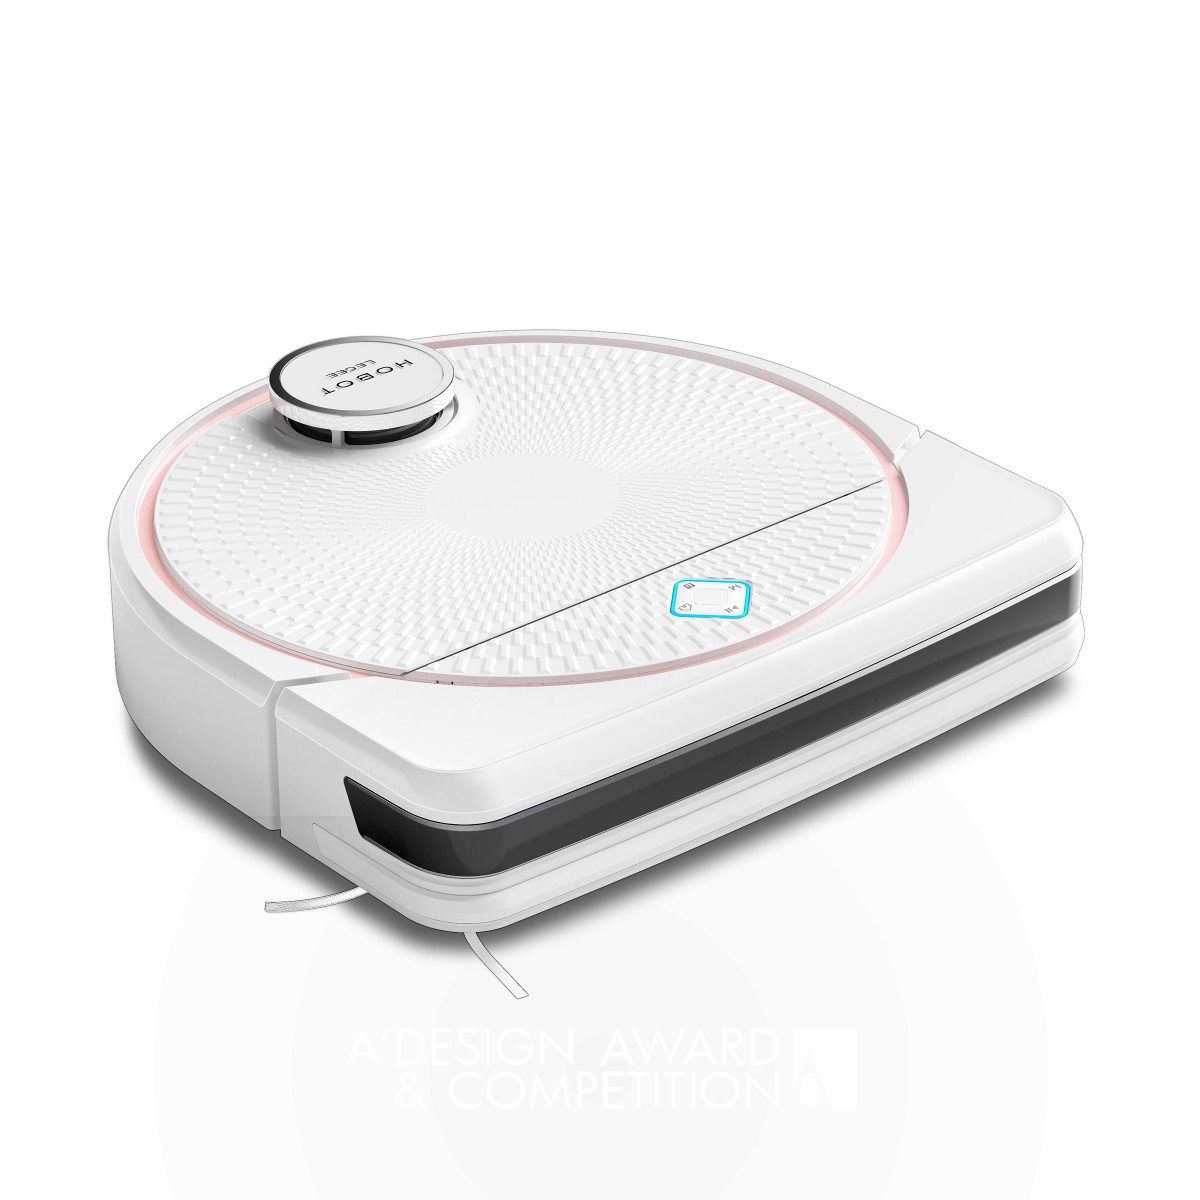 Hobot Technology Inc. wins Silver at the prestigious A' Home Appliances Design Award with LegeeD7 Vacuum Mop Robot.